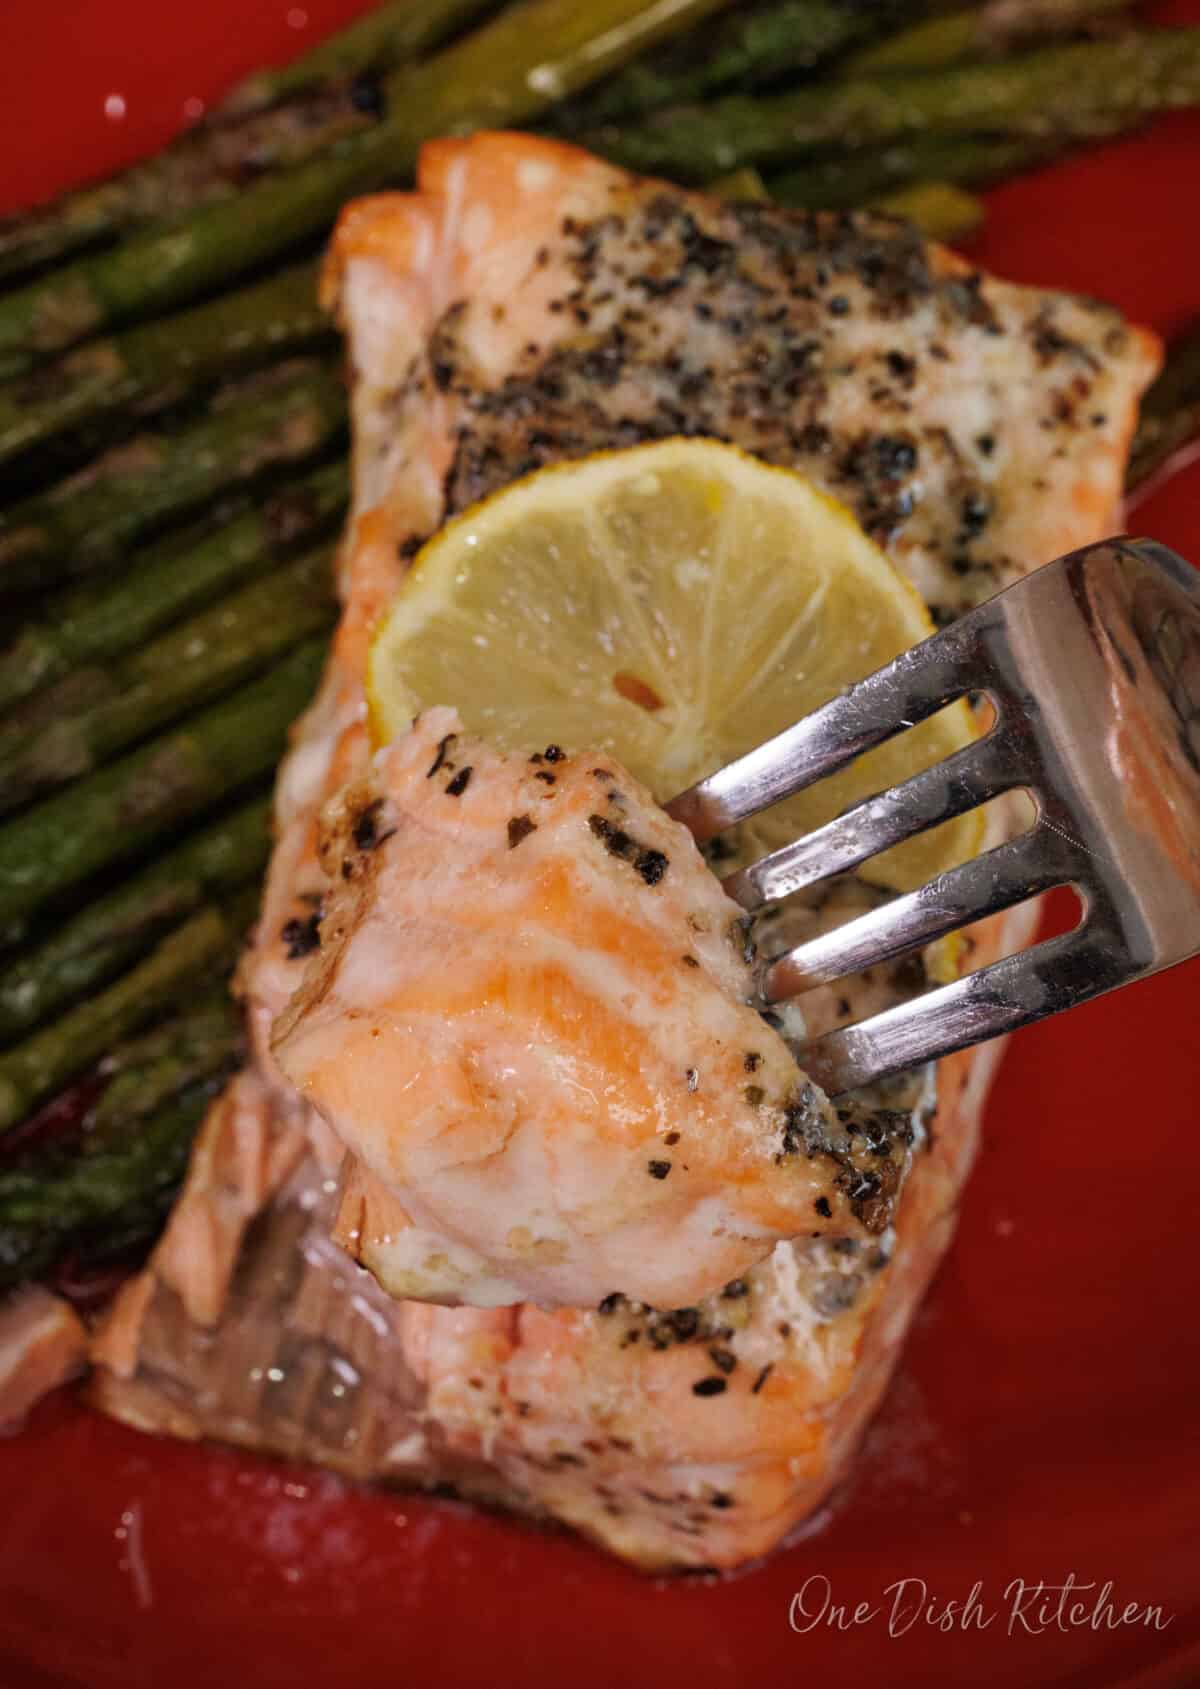 cutting into a piece of salmon with a fork